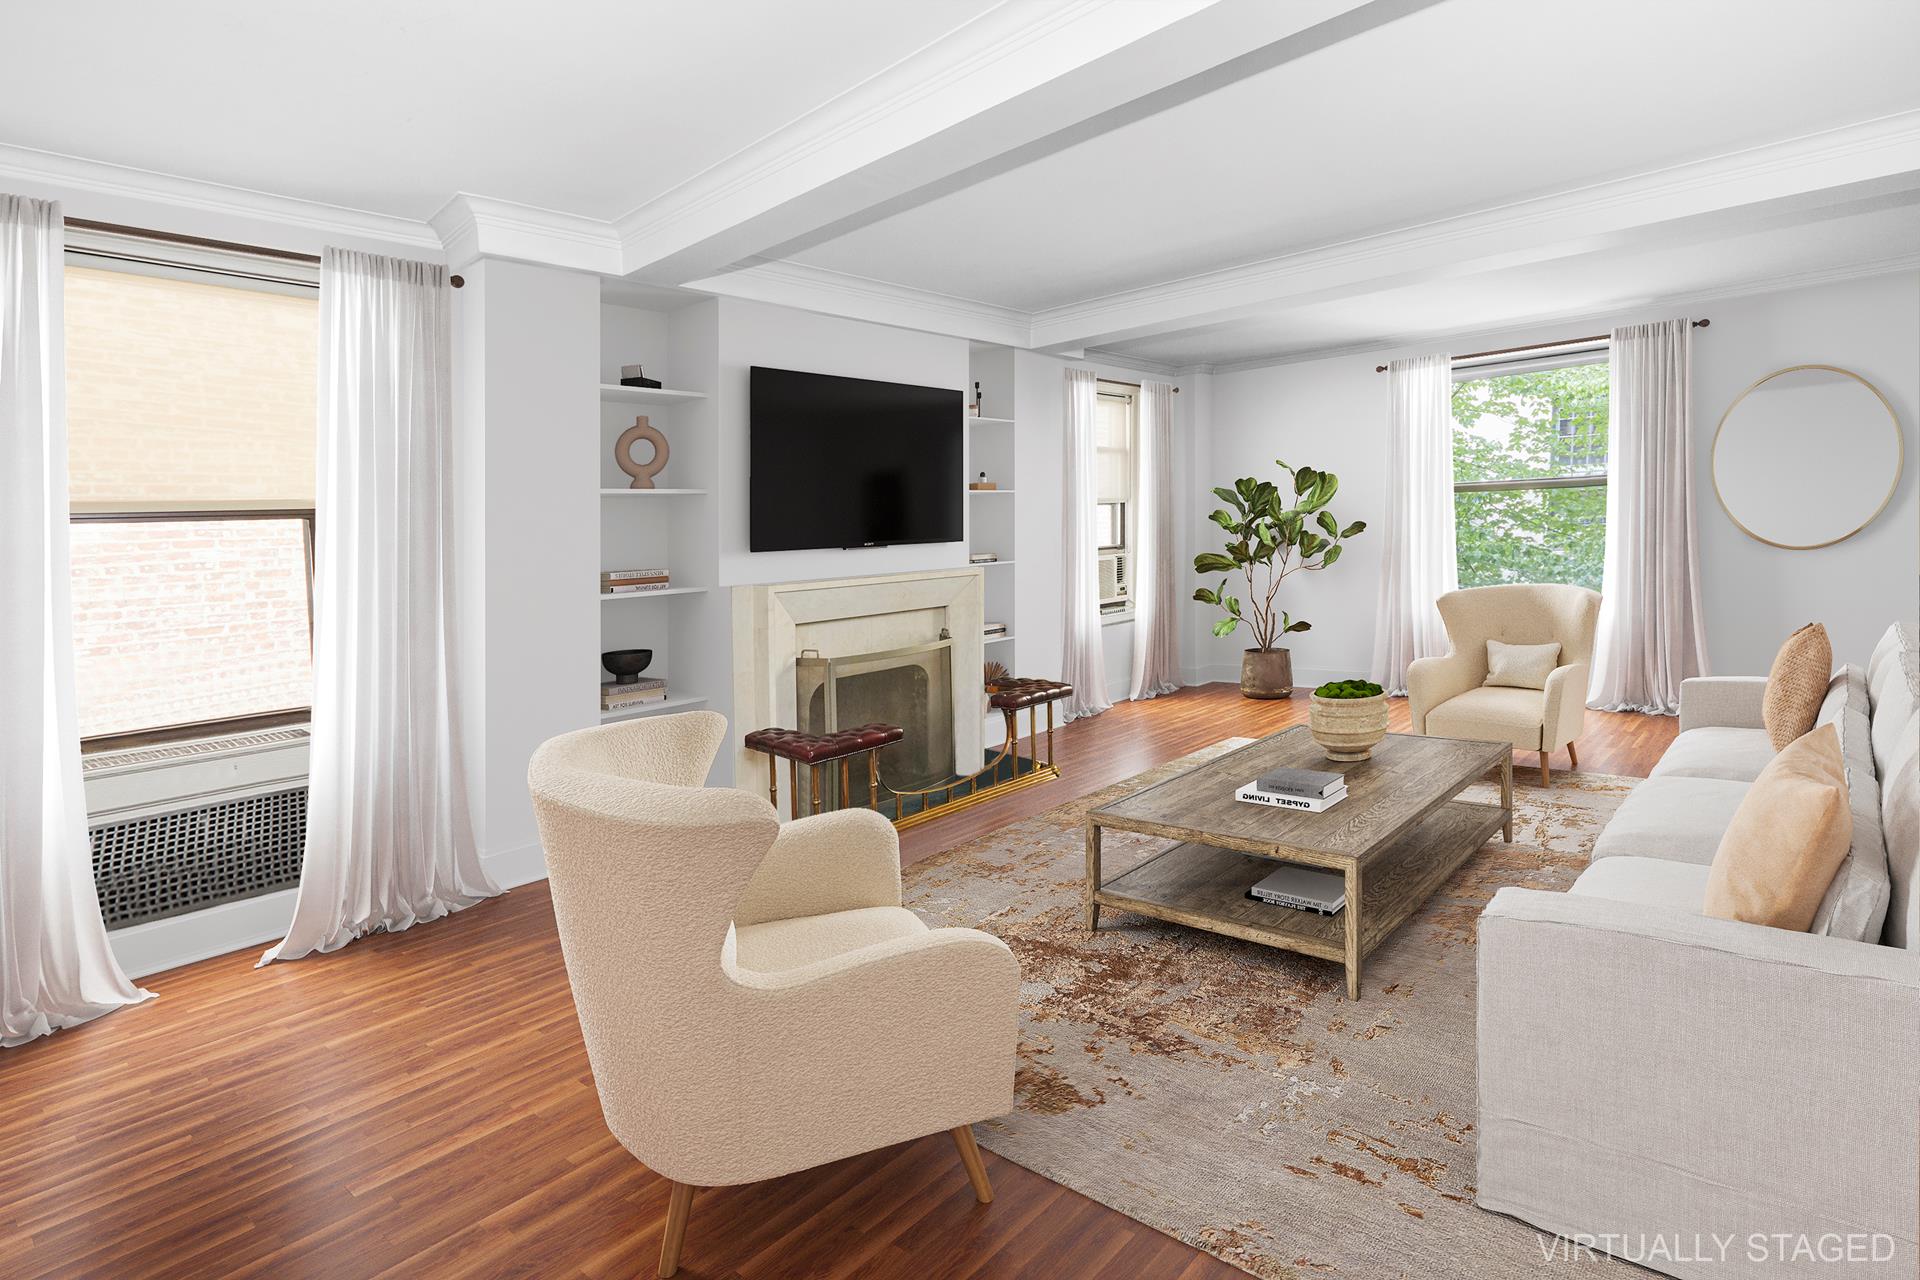 21 East 90th Street 3A, Carnegie Hill, Upper East Side, NYC - 3 Bedrooms  
3.5 Bathrooms  
8 Rooms - 